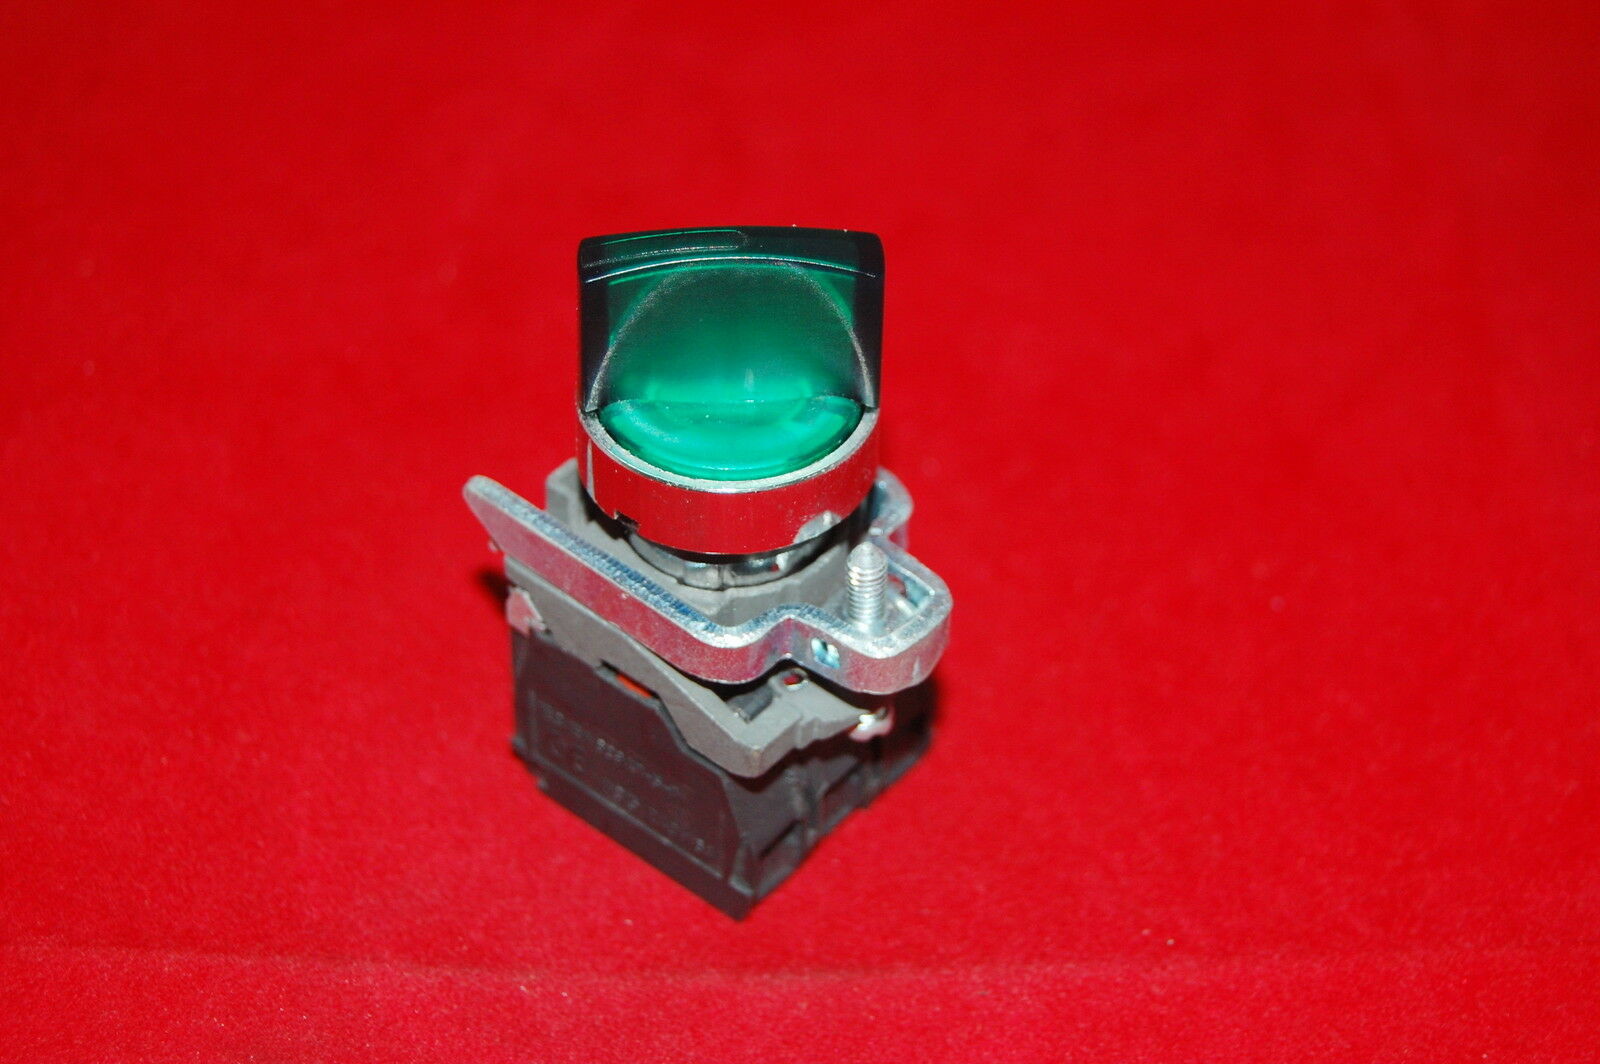 22mm ILlUMINATED Selector switch 3 Position Fits Green XB4BK133G5 110V Maintain